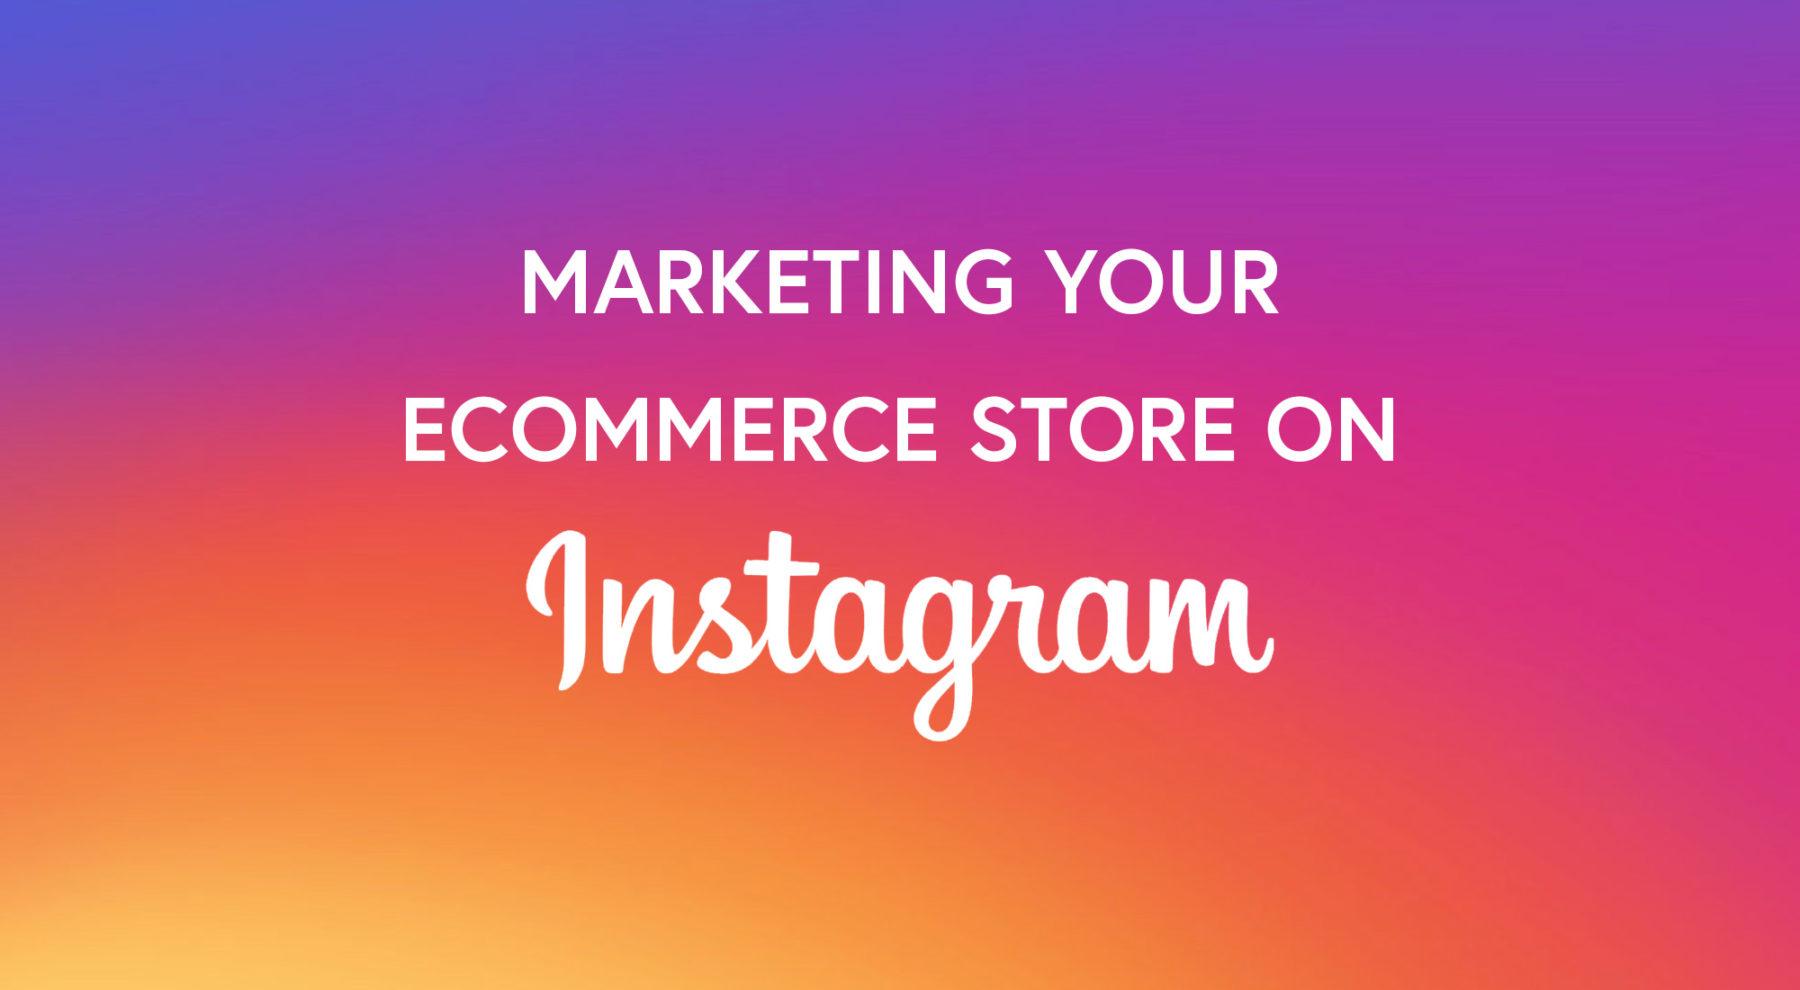 An Ecommerce Retailer's Guide to Marketing on Instagram